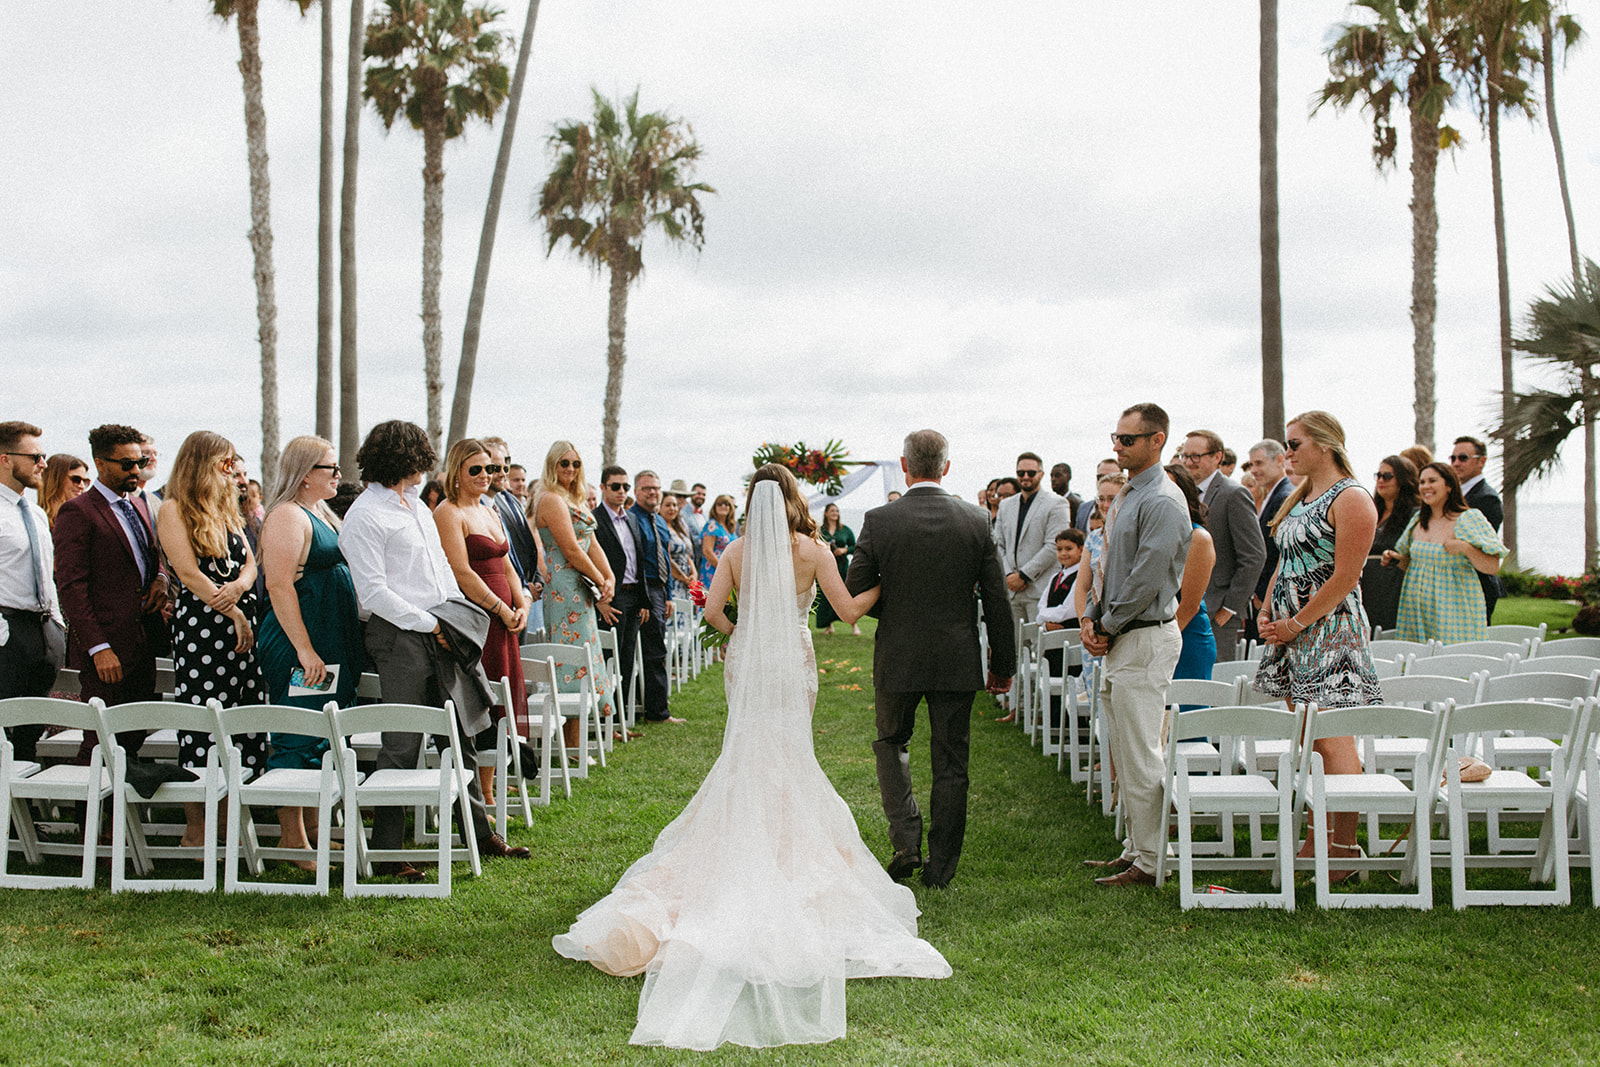 photo of brides train and chapel length veil walking down all grass wedding aisle during tropical wedding